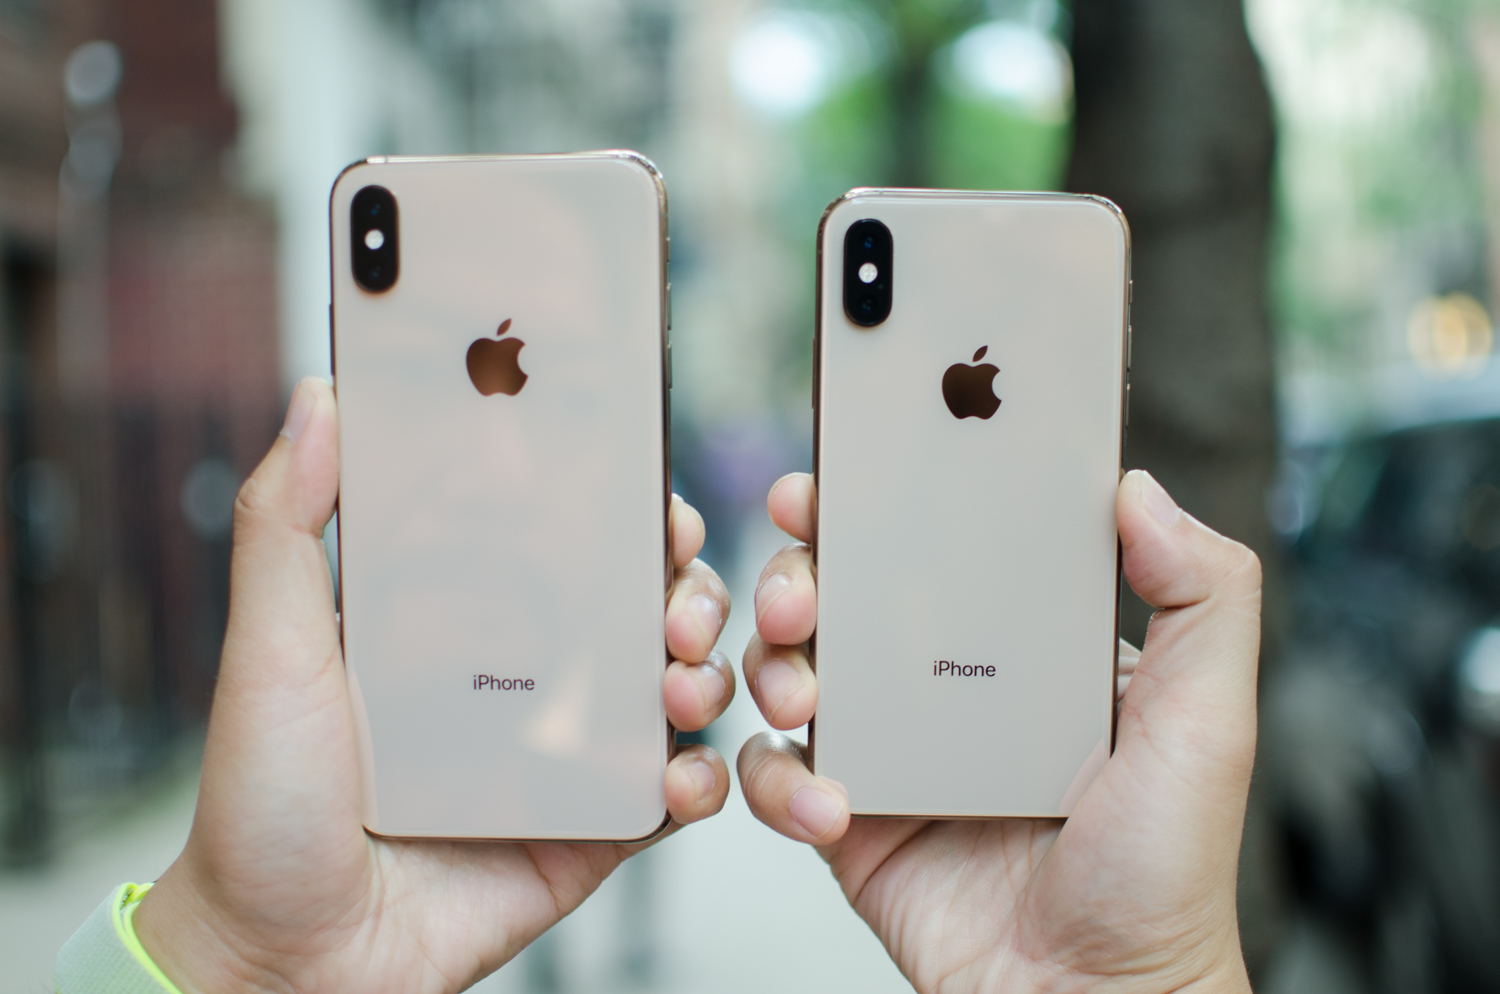 iPhone XS Max review: Apple's supersized smartphone, iPhone XS